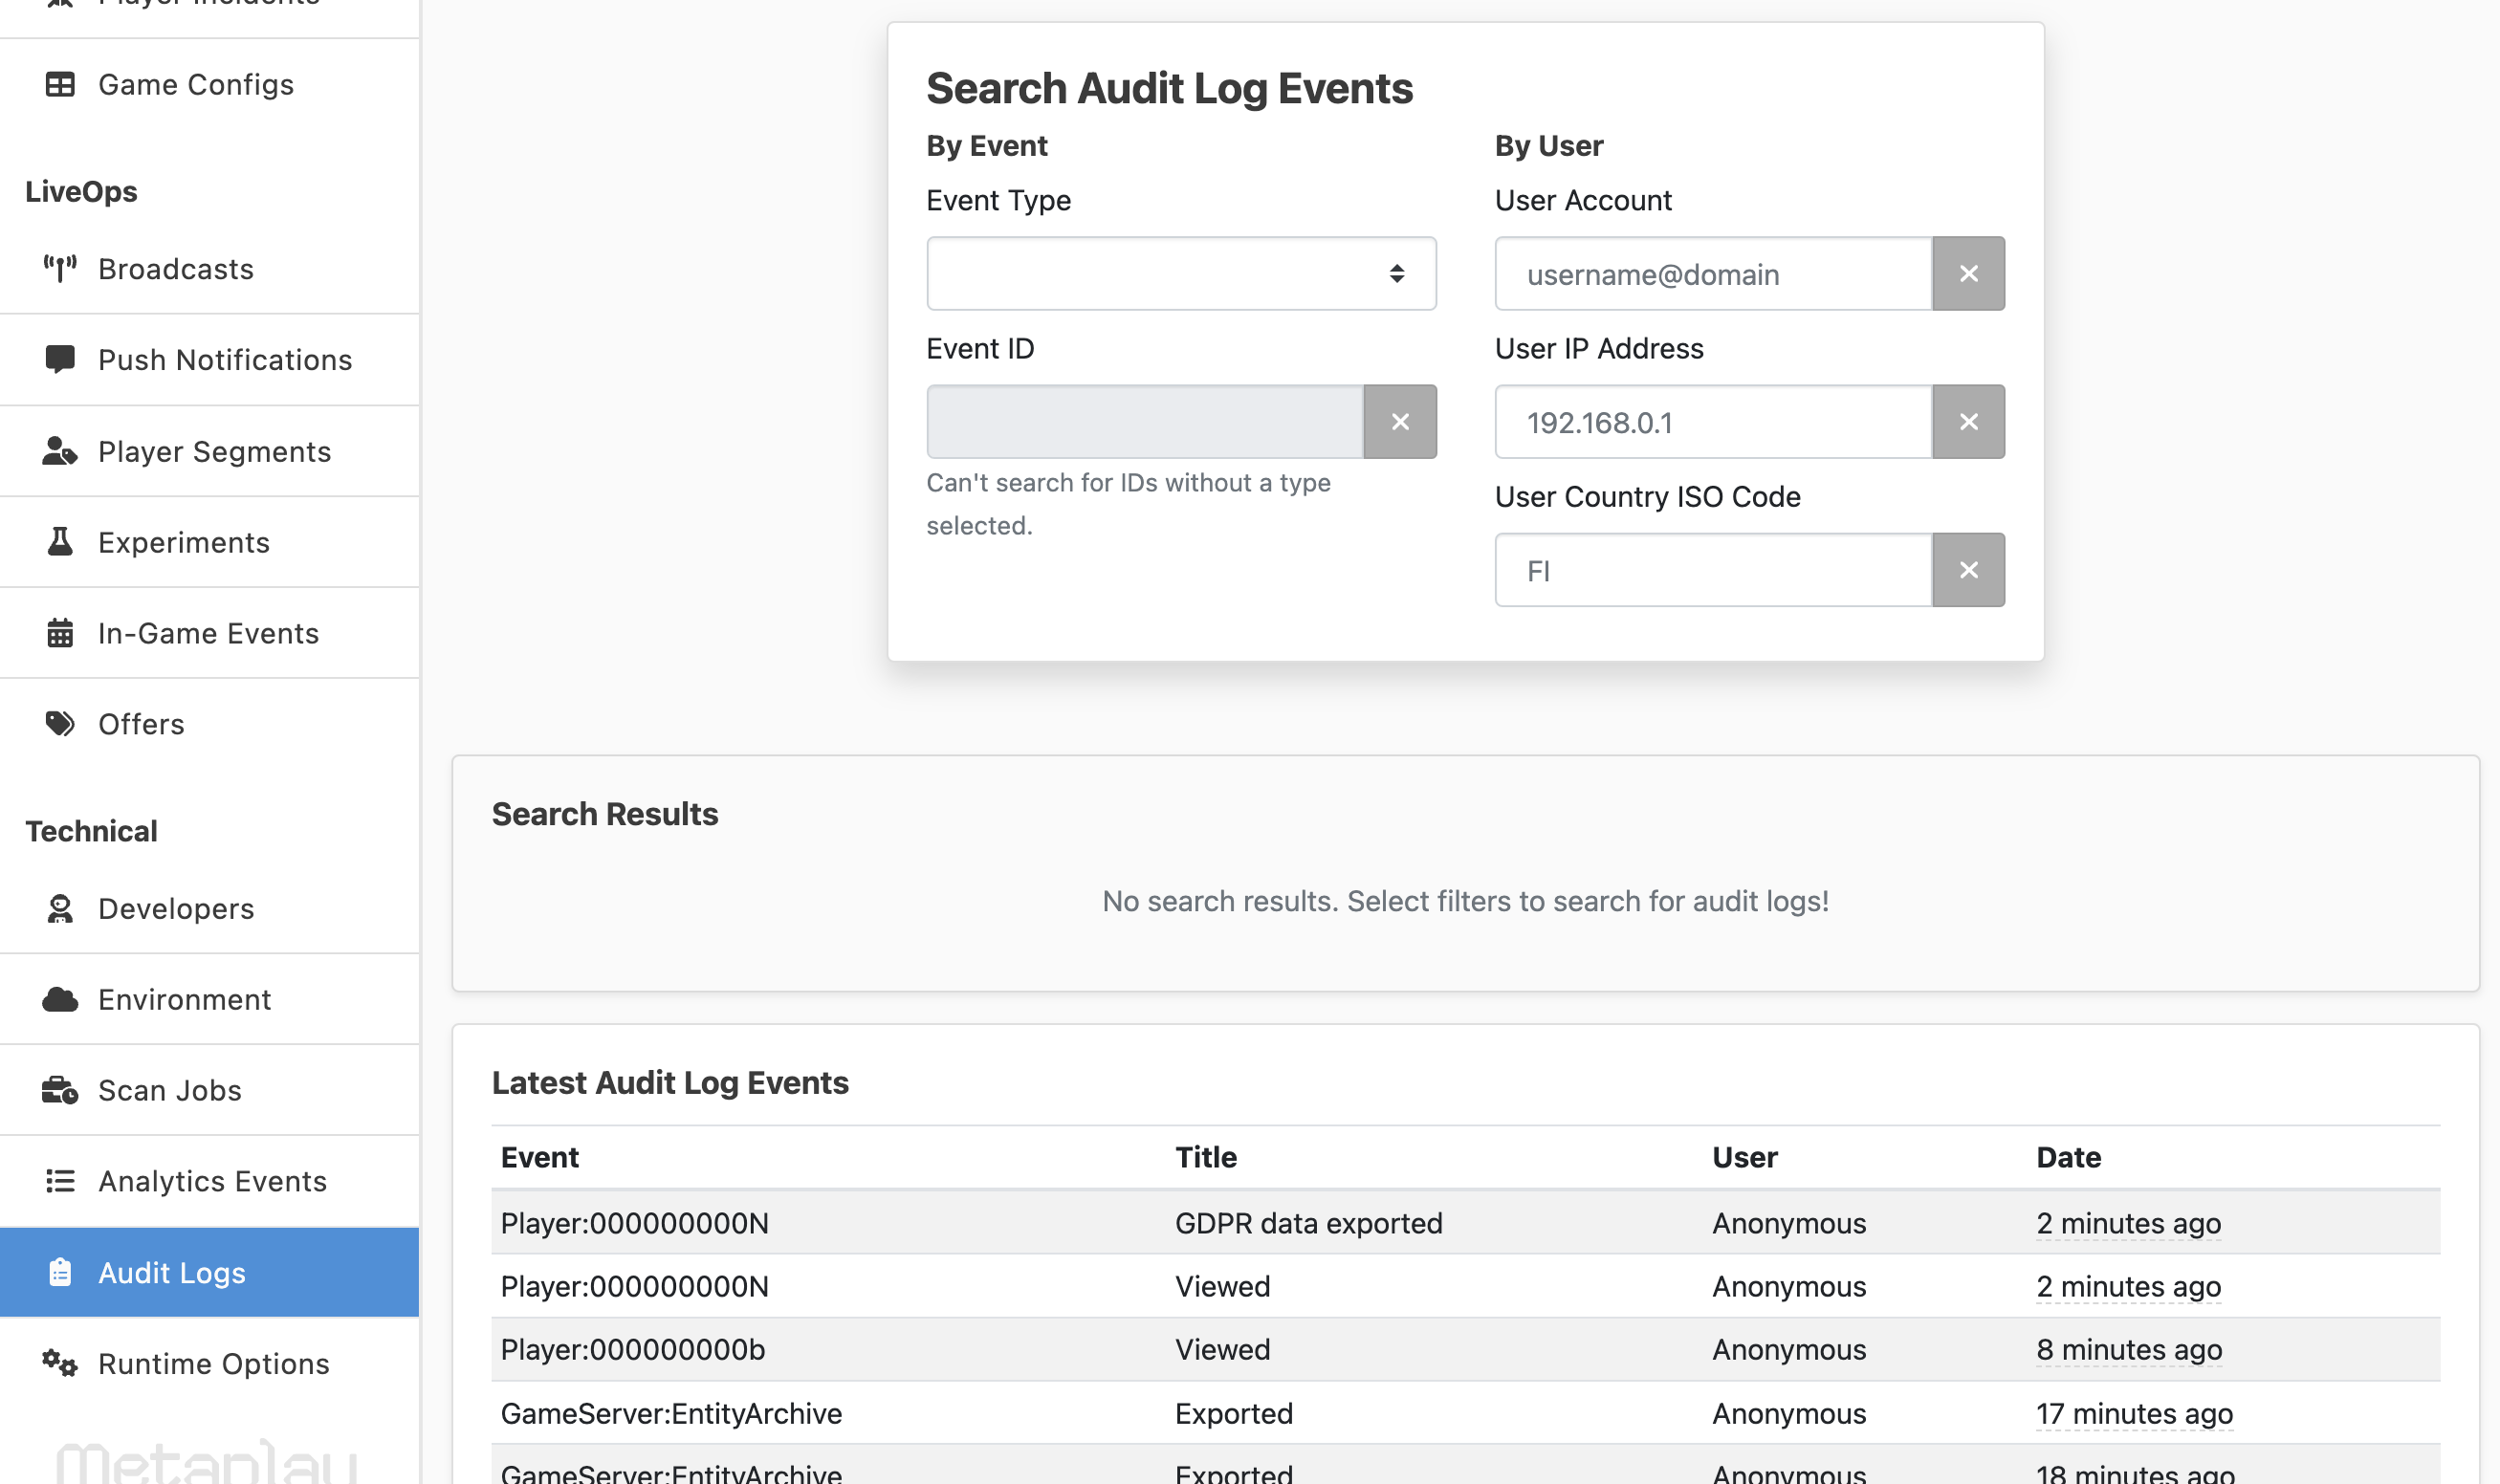 The dashboard has a dedicated page for browsing audit logs.